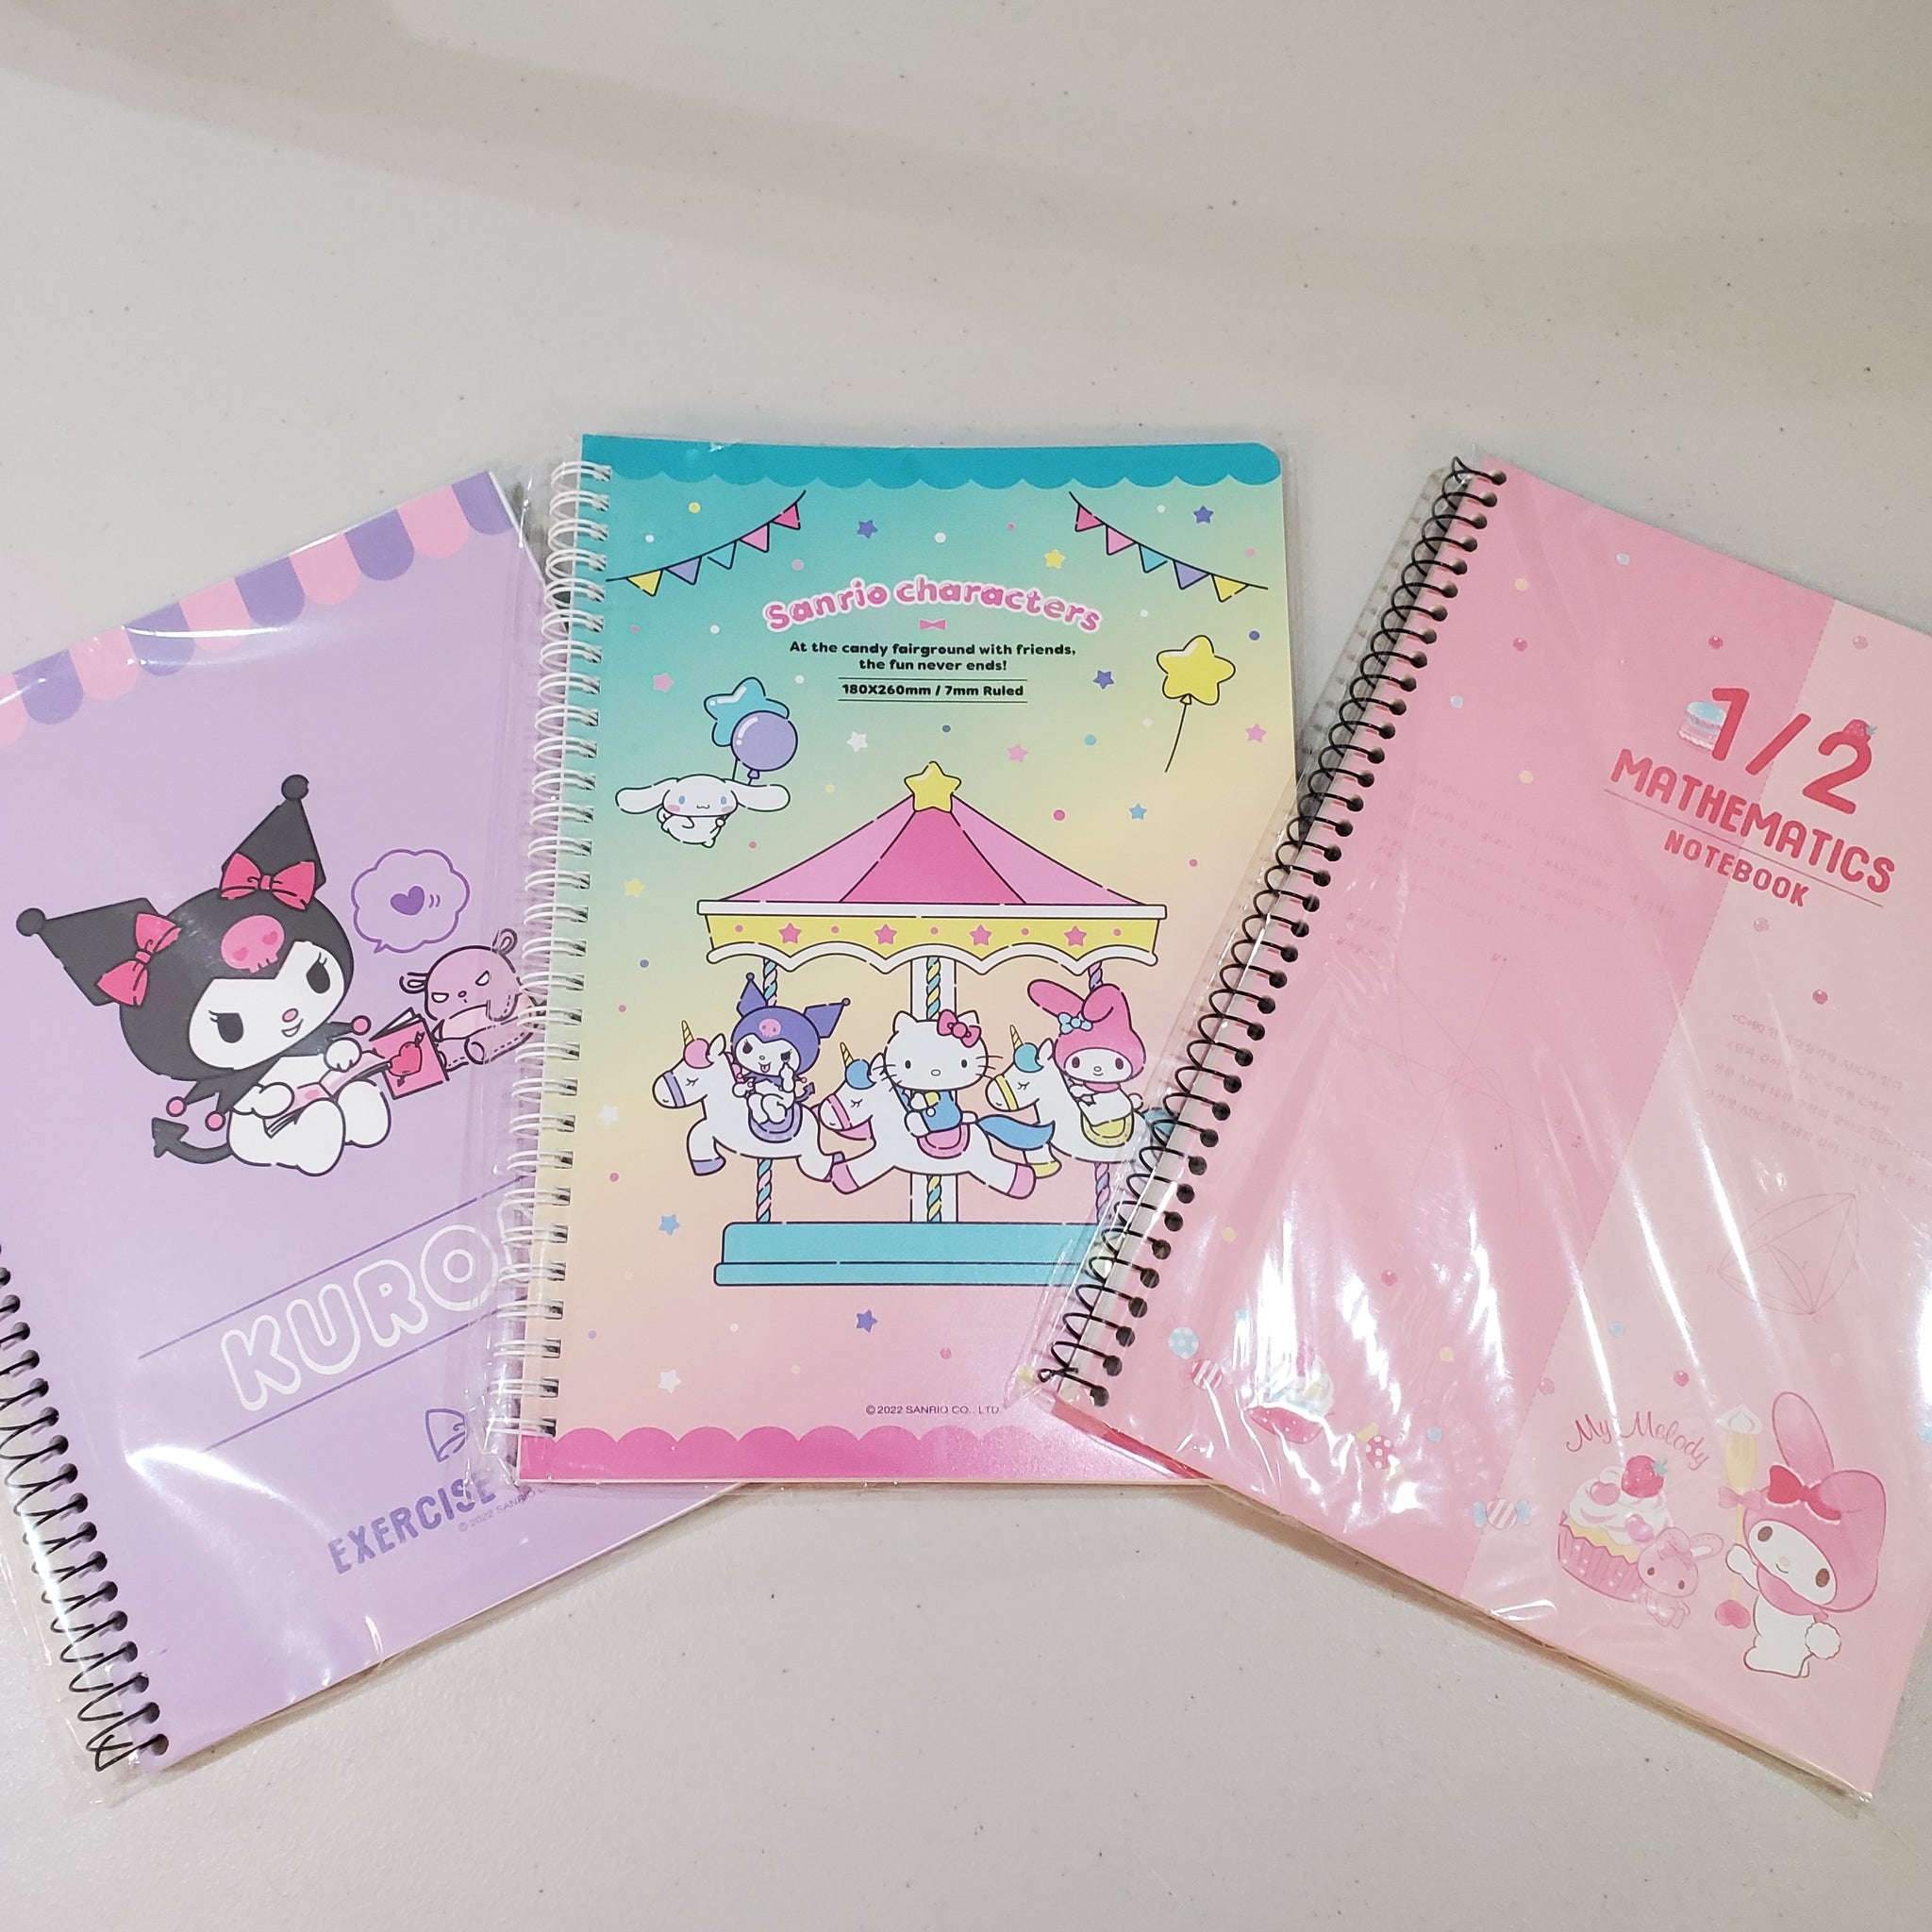 Add Some Kawaii to your Back-to-School Shopping List